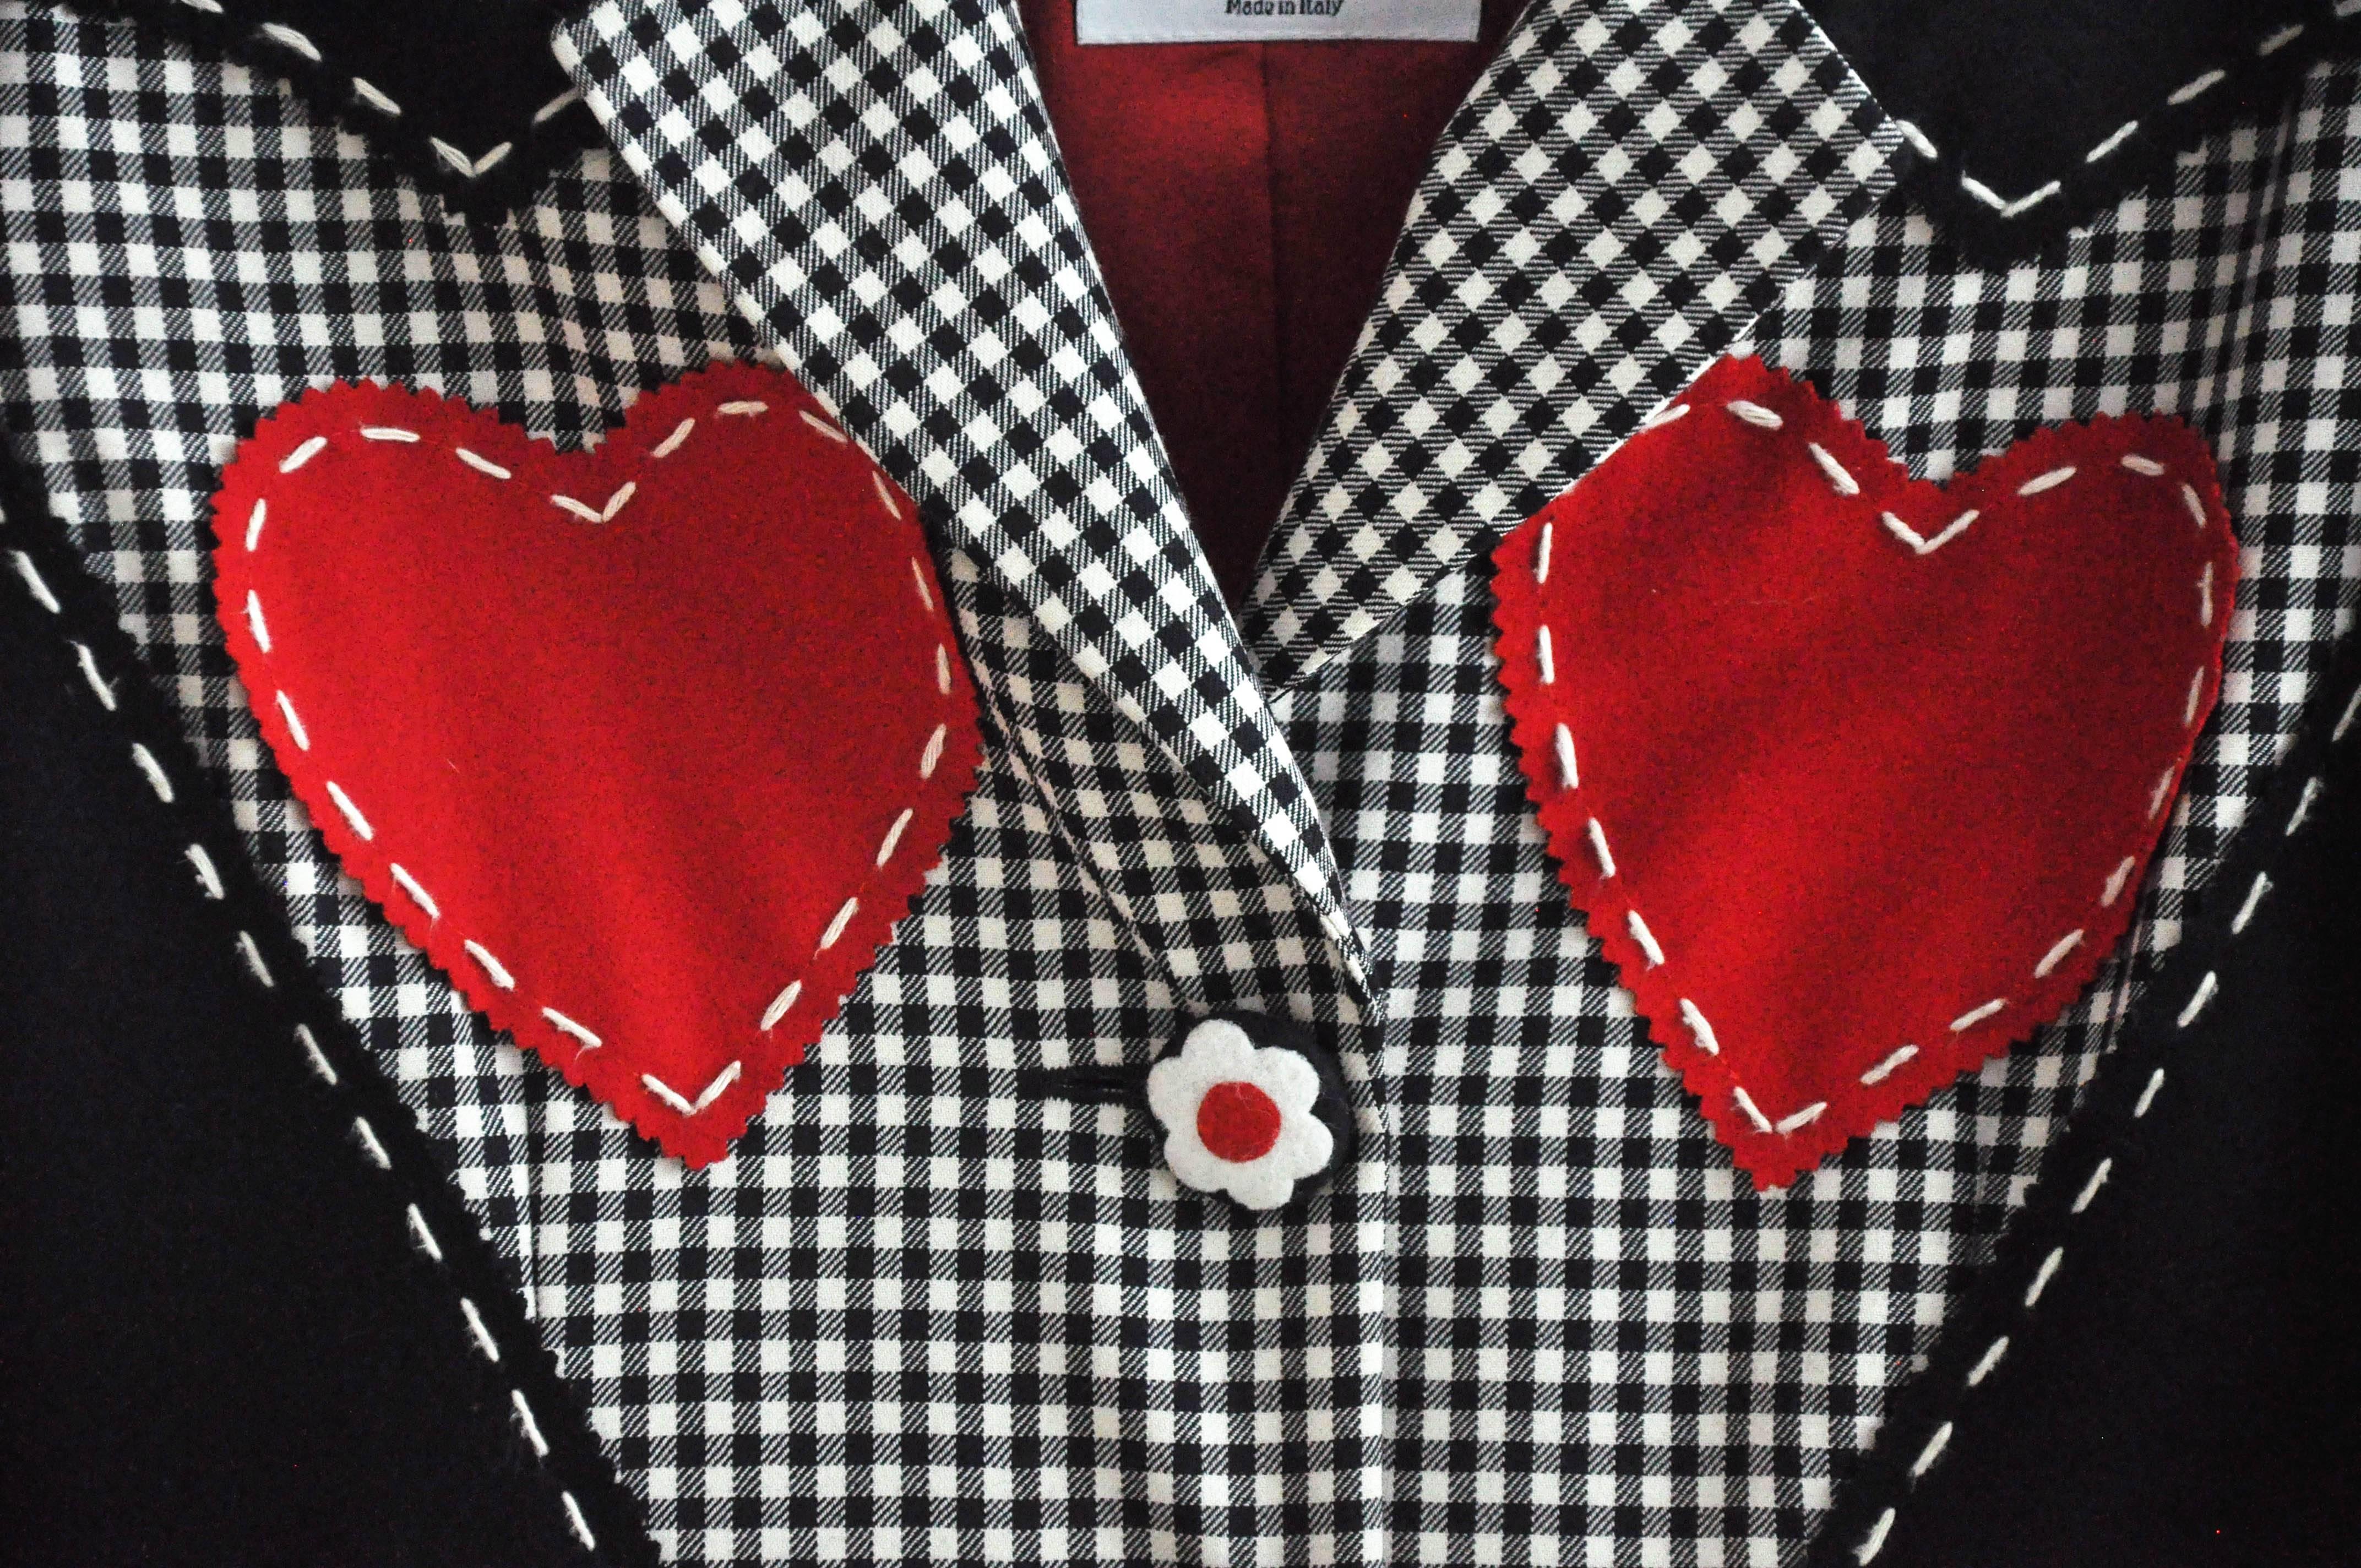 A colorful, black and white checkered blazer with twin red hearts by the innovative Italian designer Franco Moschino (1950-1994) .  Known for his bold, modern designs that often satirize high fashion.  The exuberant design of this jacket, stitched